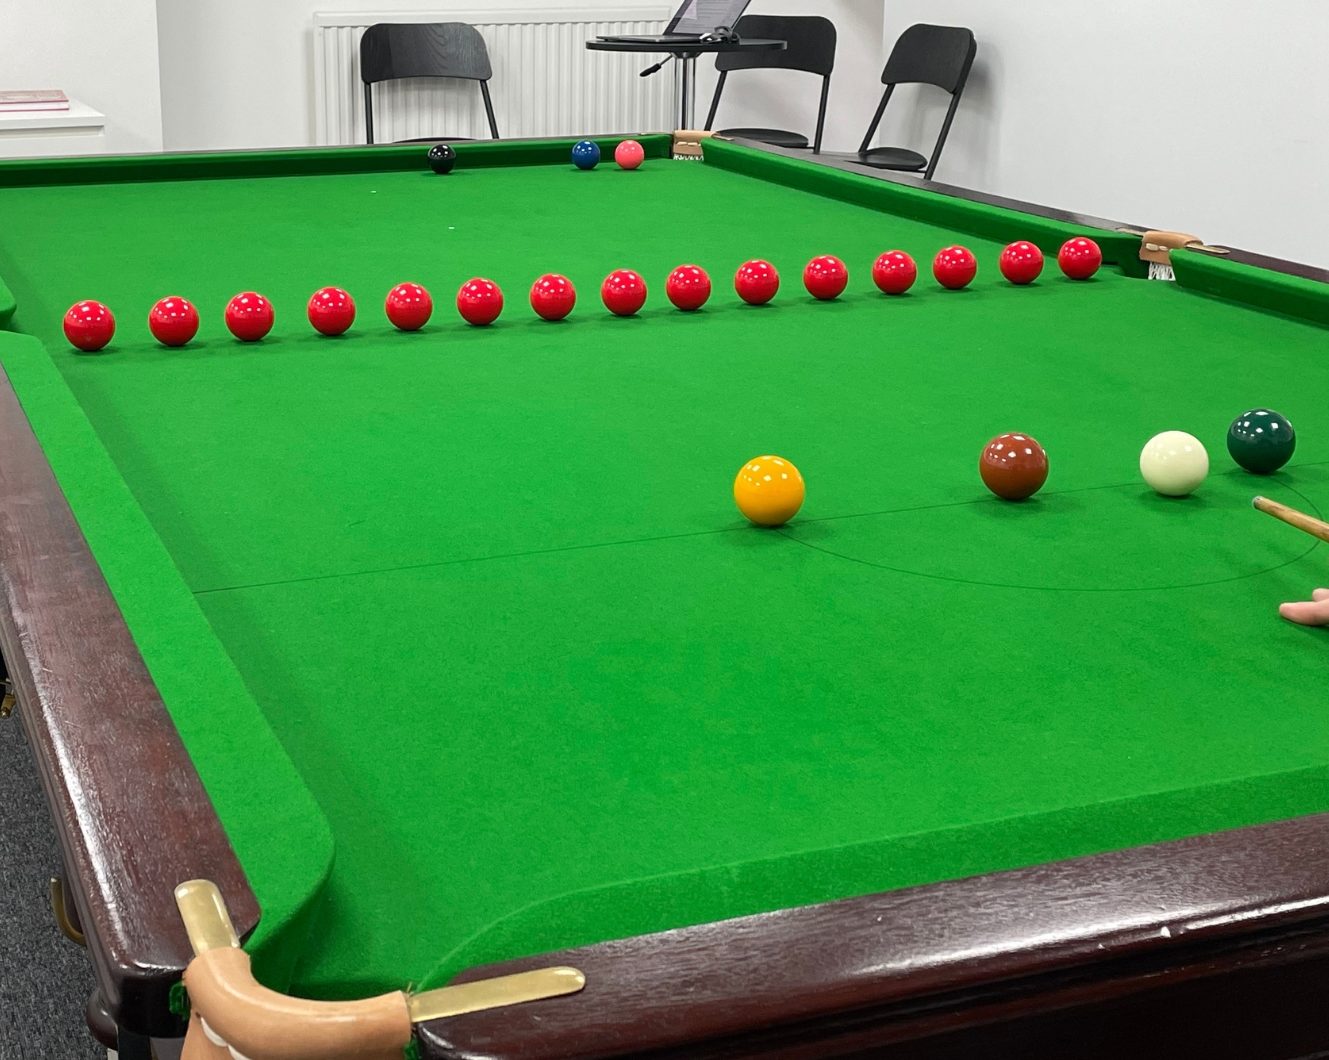 Snooker balls: How to get started with snooker trick shots